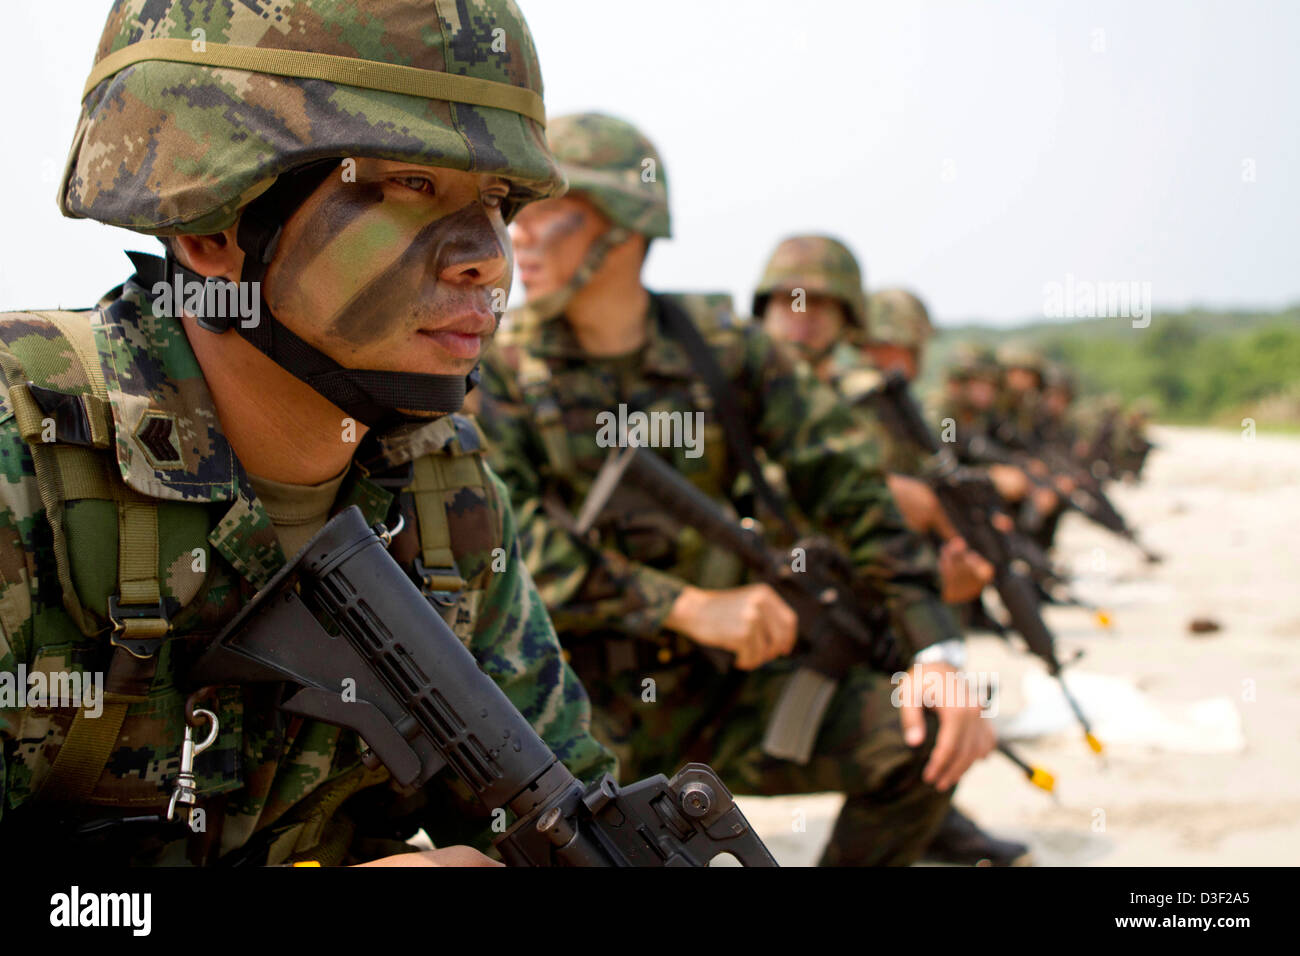 Royal Thai Marines assemble after coming ashore during a beach landing exercise during Cobra Gold 2013 February 15, 2013 in Hat Yao, Thailand. Cobra Gold is an annual event with the United States and Kingdom of Thailand to increase readiness in the Asia-Pacific region. Stock Photo